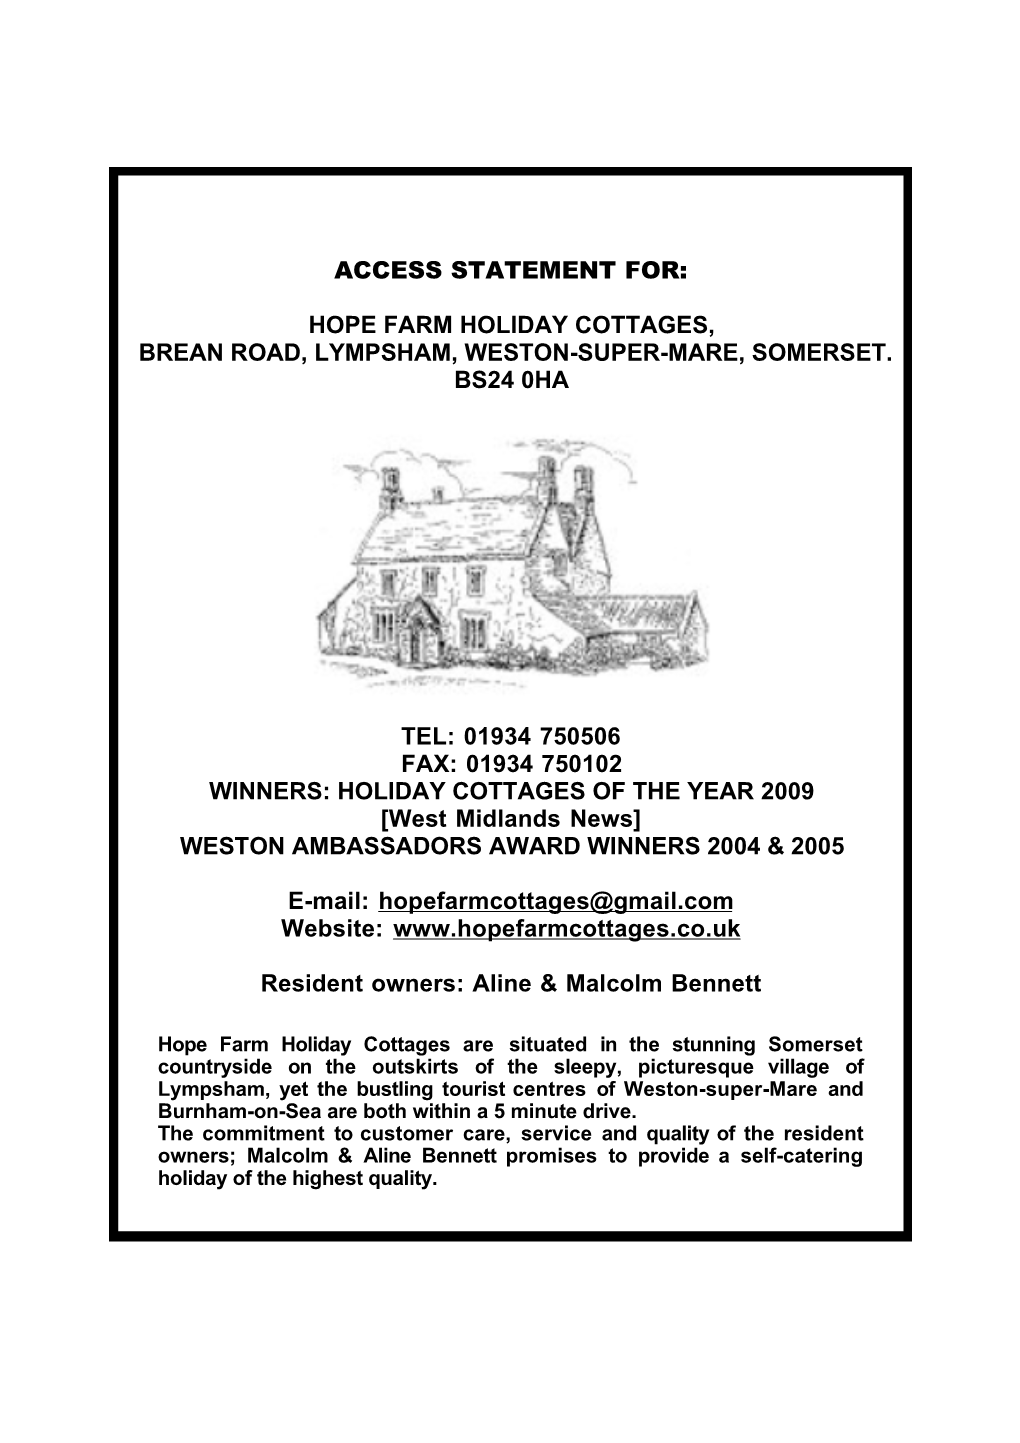 Access Statement For: Hope Farm Holiday Cottages